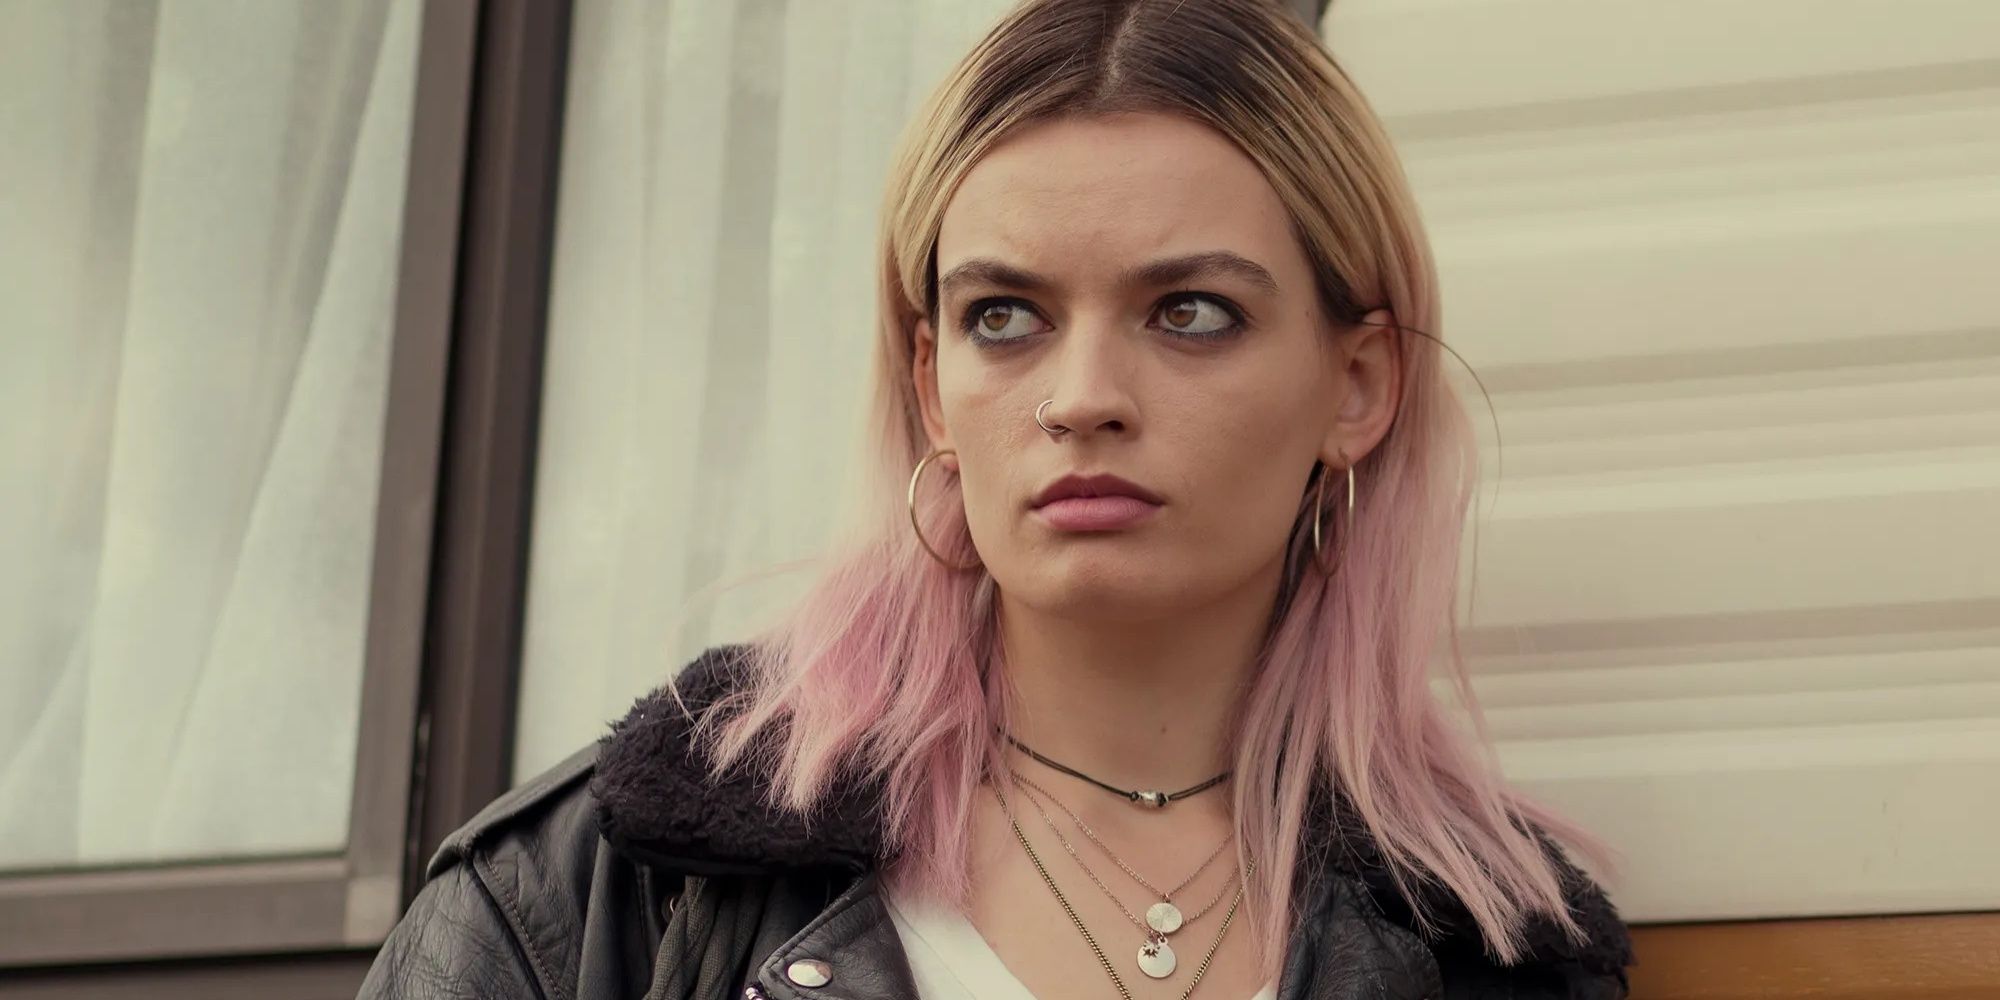 Maeve Wiley with her pink hair, piercings, and leather jacket in 'Sex Education.'